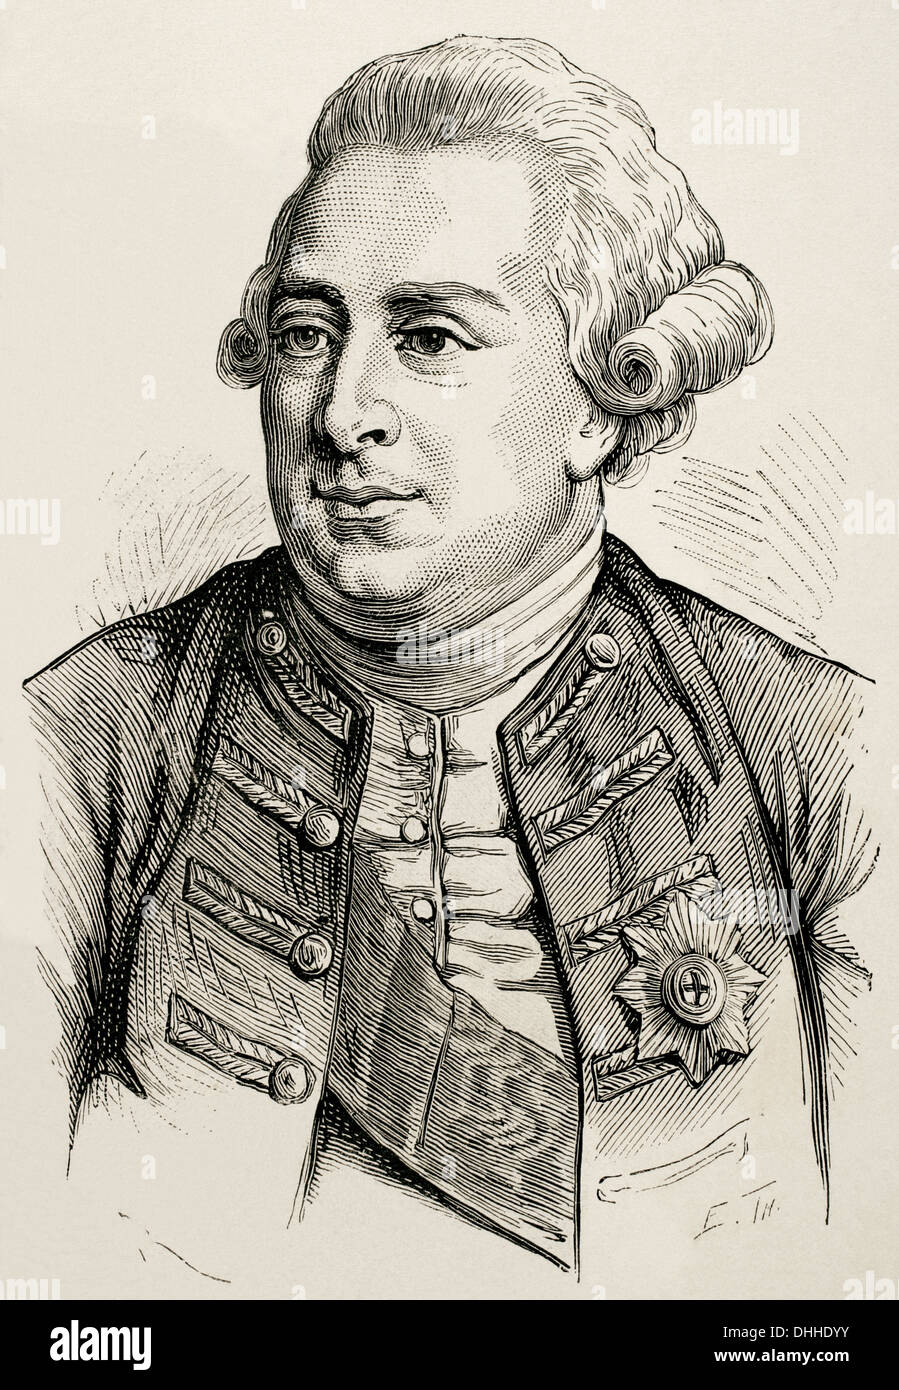 George III (1738-1820). King of Great Britain and Ireland later King of the United Kingdom and of Hanover. Engraving. Stock Photo